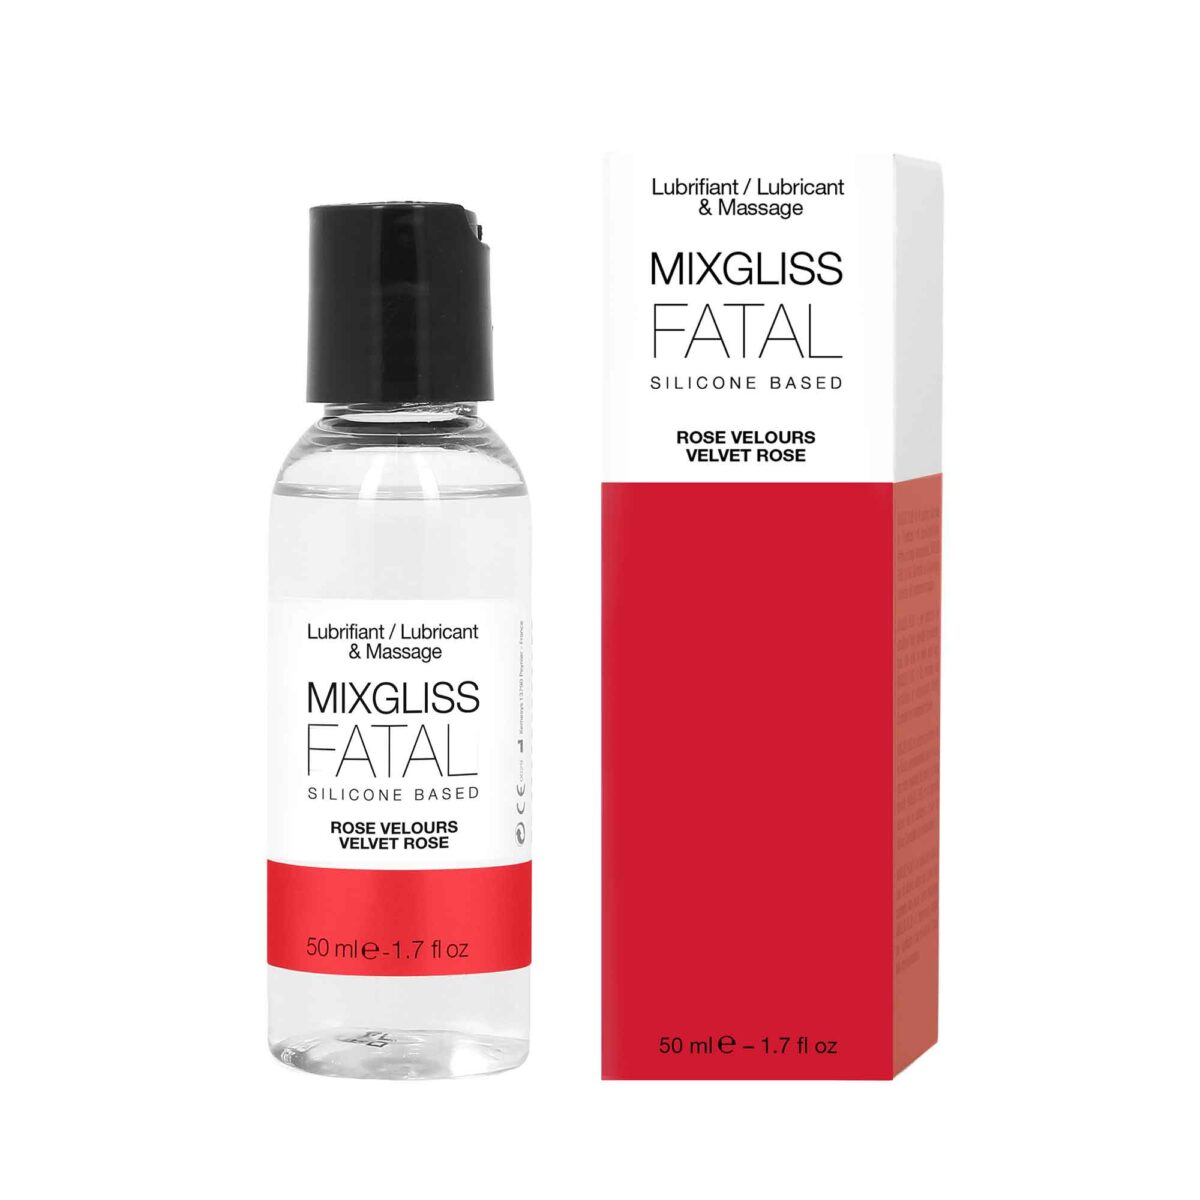 Mixgliss - Silicone-based Lubricant Fatal- Velvet rose